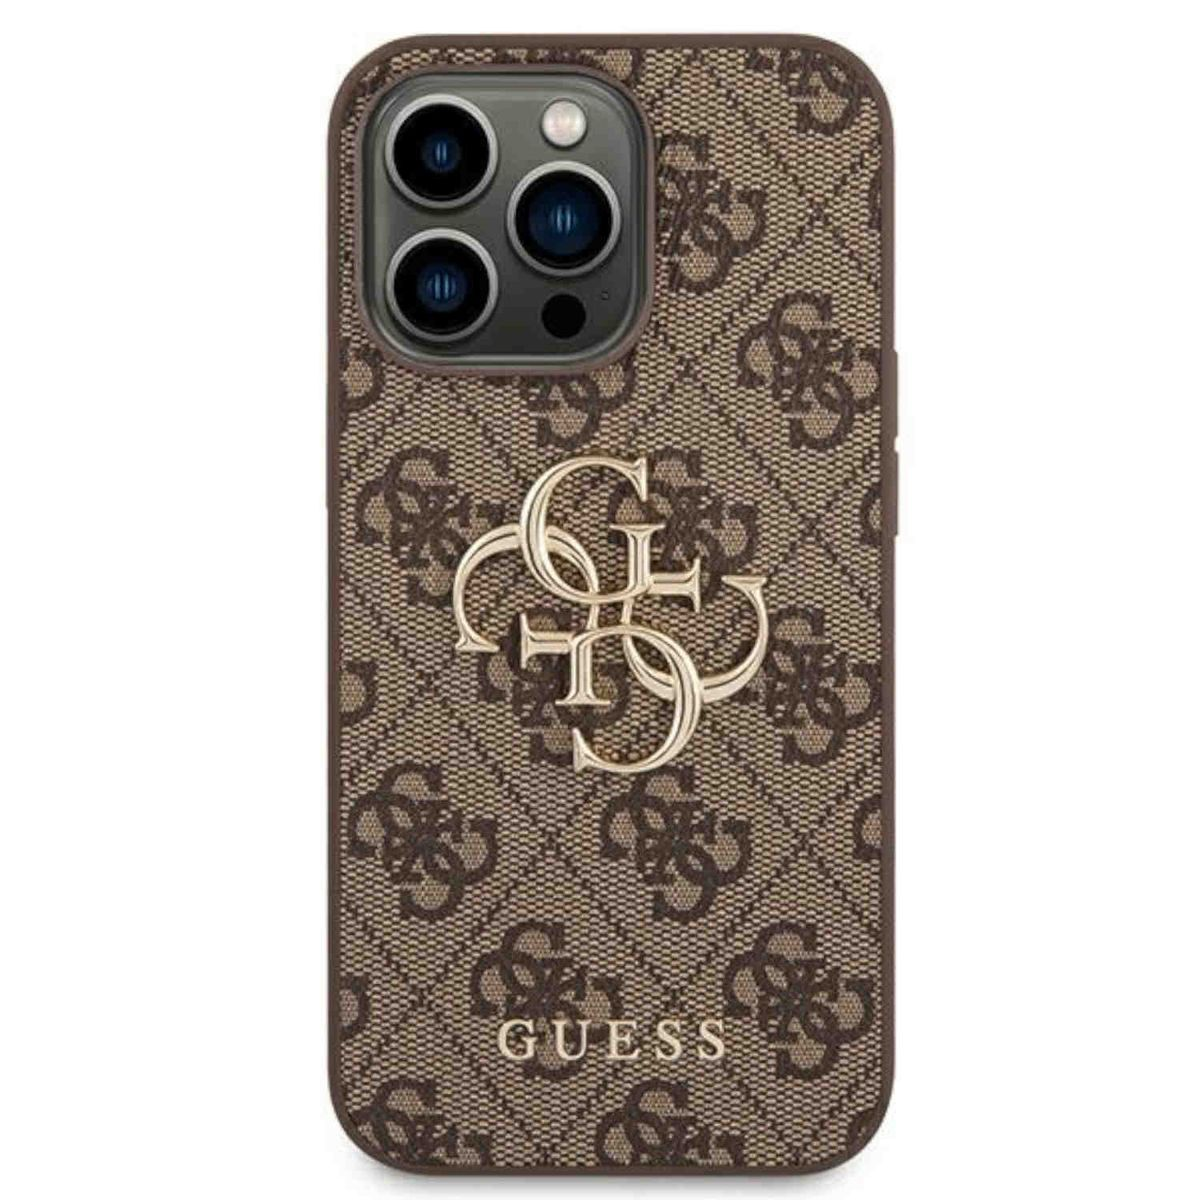 GUESS Max Keine Apple, Pro 4G iPhone Big (Brown), iPhone Pro Backcover, Angabe Metal Case Logo 14 14 Max,